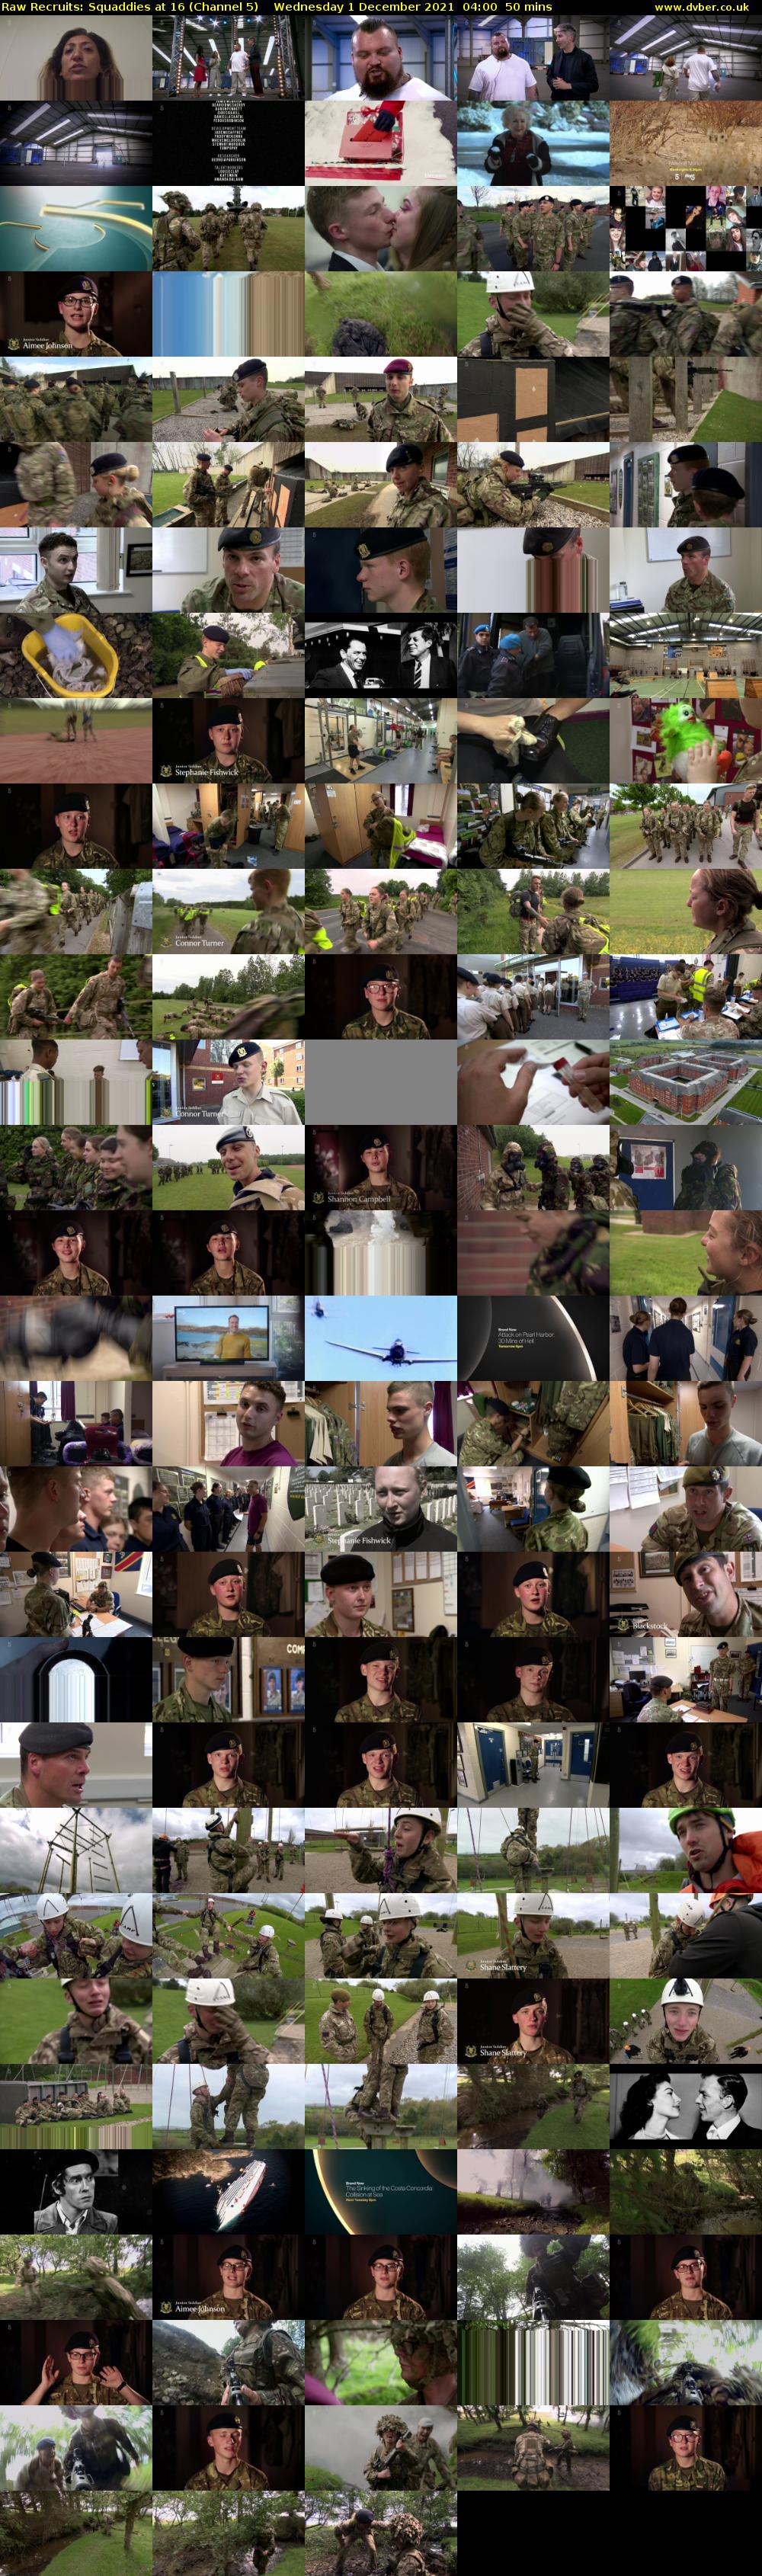 Raw Recruits: Squaddies at 16 (Channel 5) Wednesday 1 December 2021 04:00 - 04:50